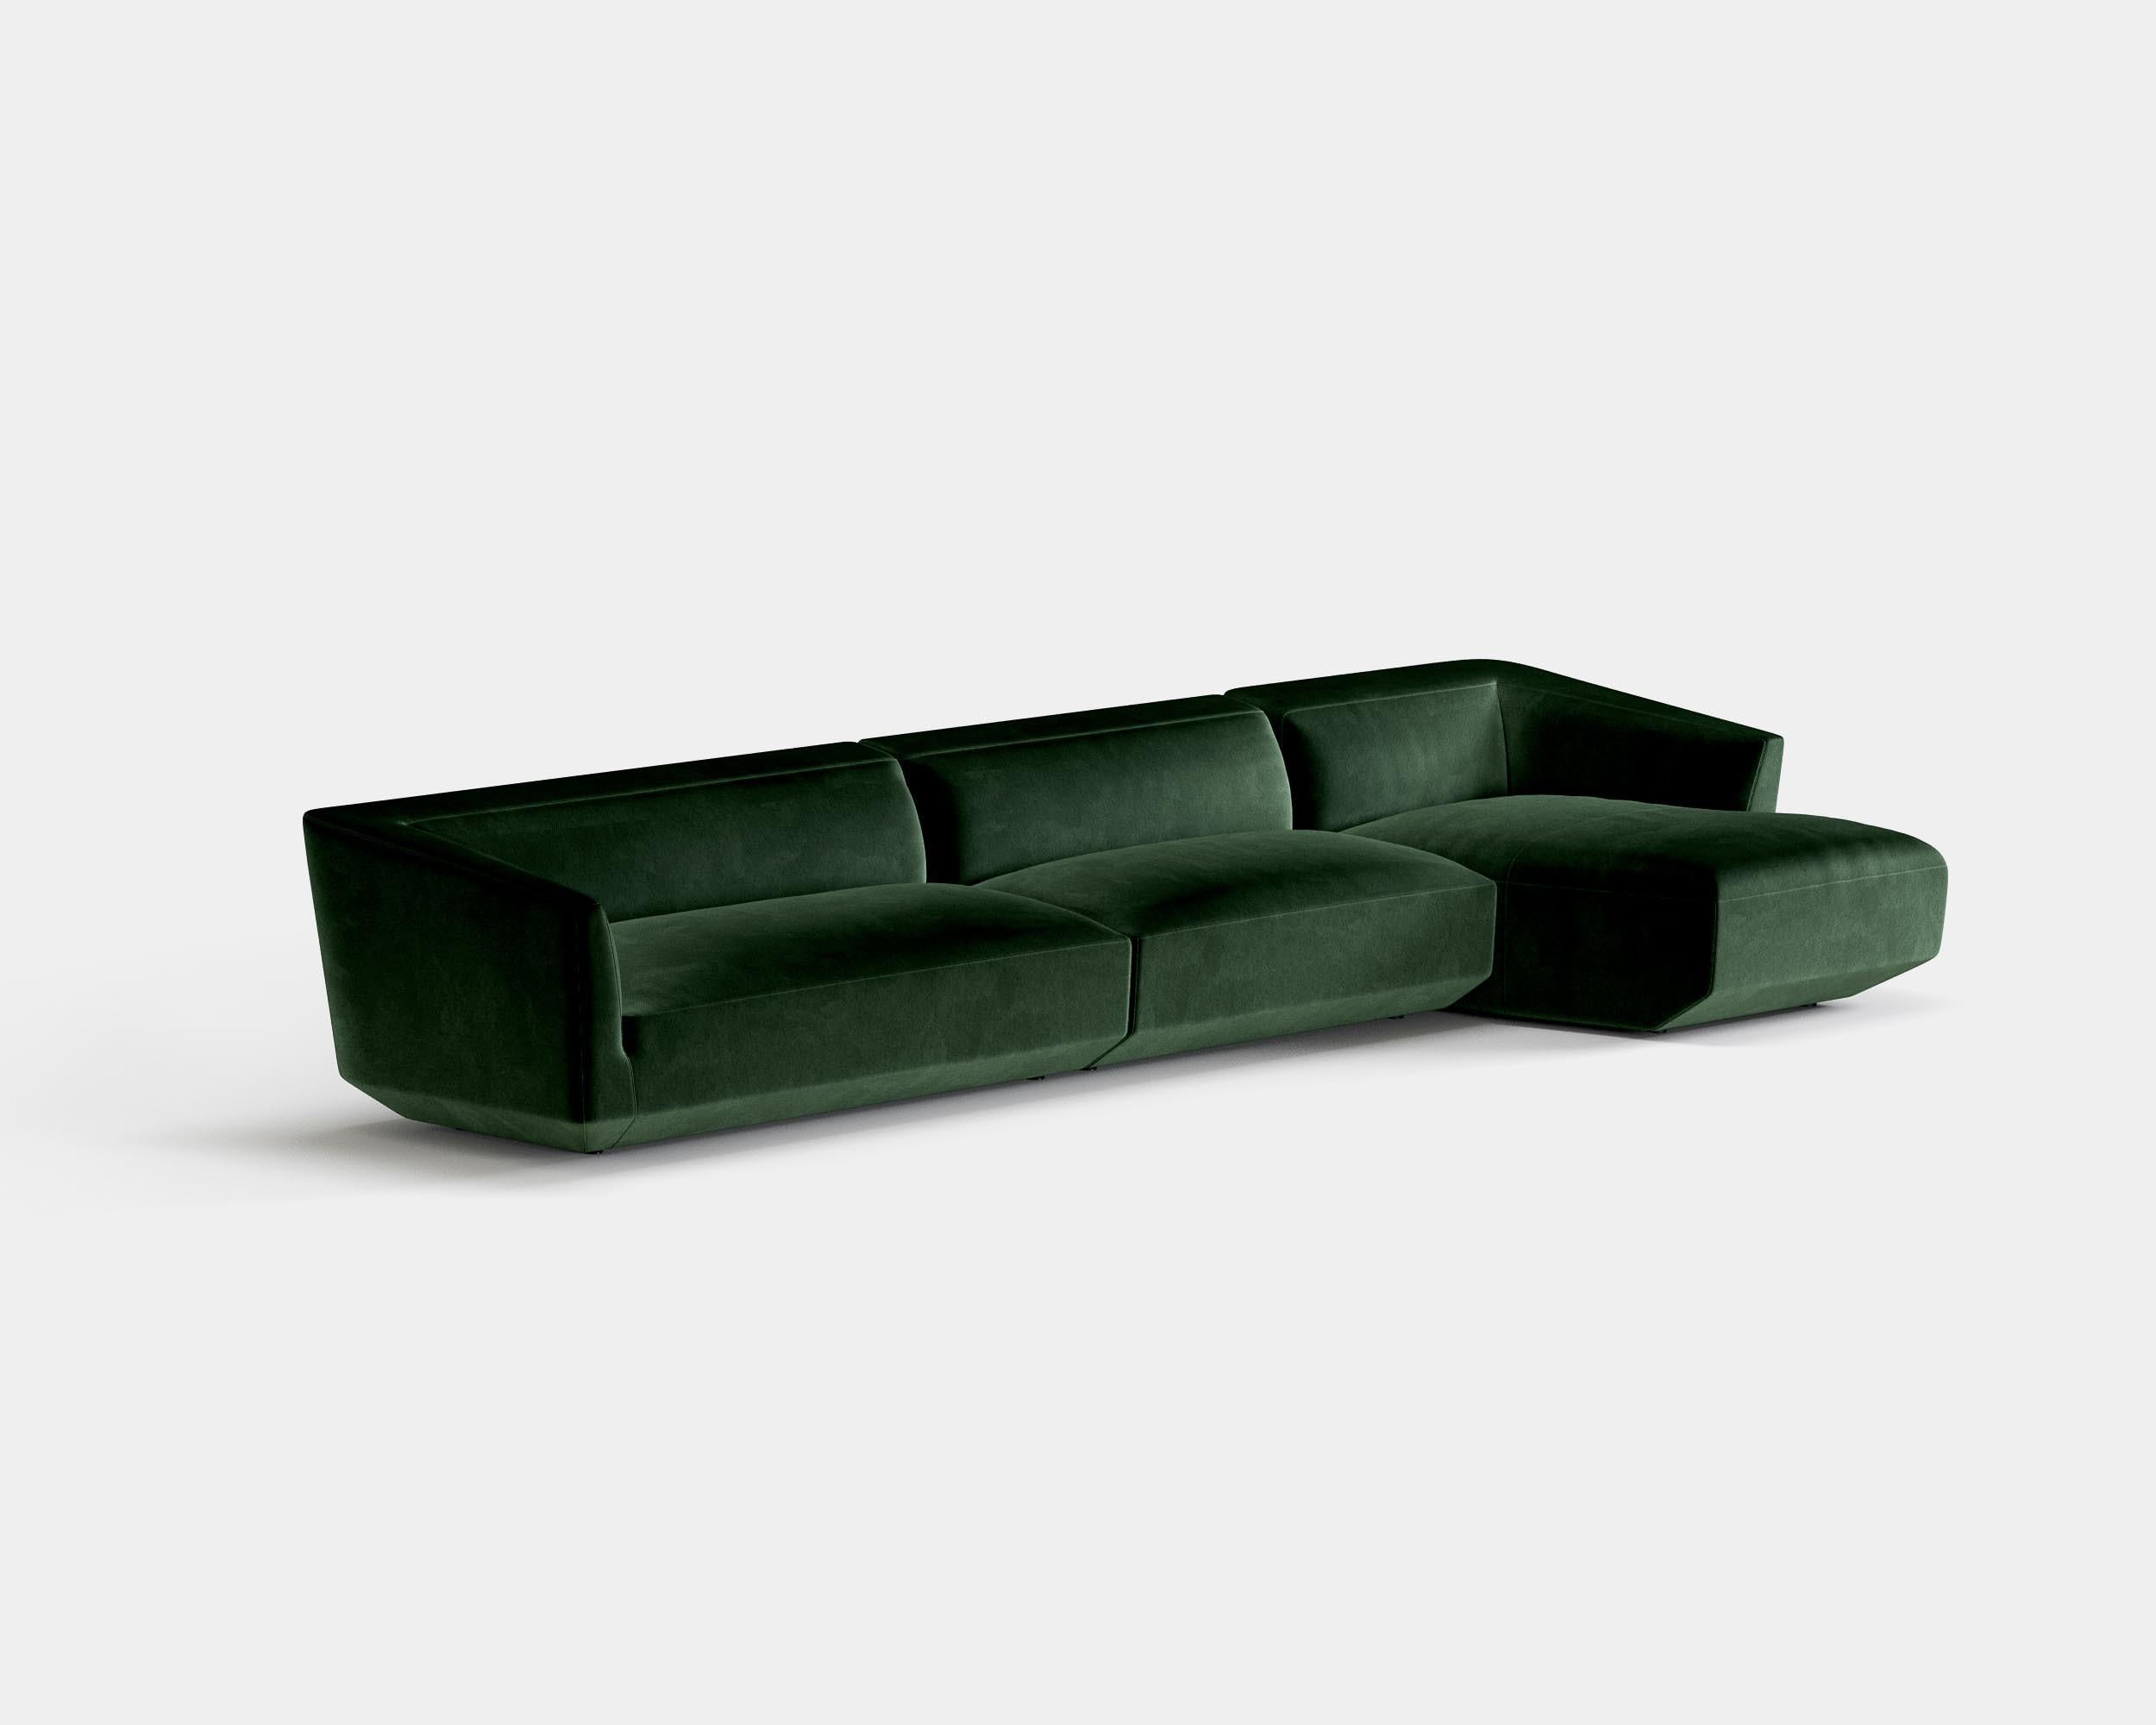 Panis sofa (setup 3) by Amura Lab.

Dimensions : H. 70 x 387 x 147 cm
Modules: 021l + 143l + 018

Fabric reference in picture : Nobilis 25

More modules available in different fabrics and colors.
 
“Soft shapes declinable in all possible